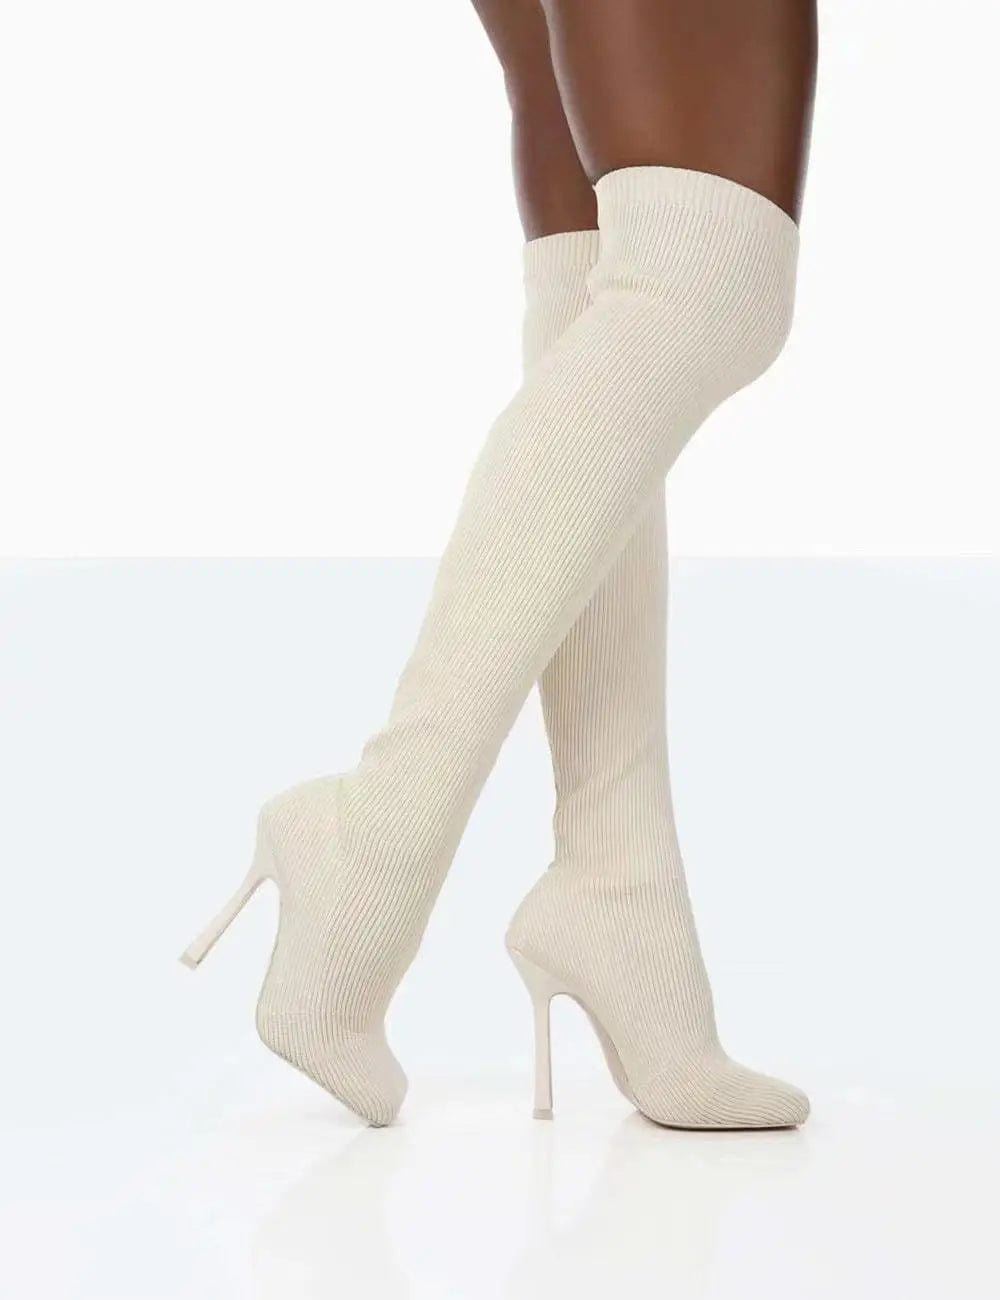 LOVEMI  Bottes Off white / 5 Lovemi -  Thigh High Boots Women Over The Knee Long Boots Fashion Shoes